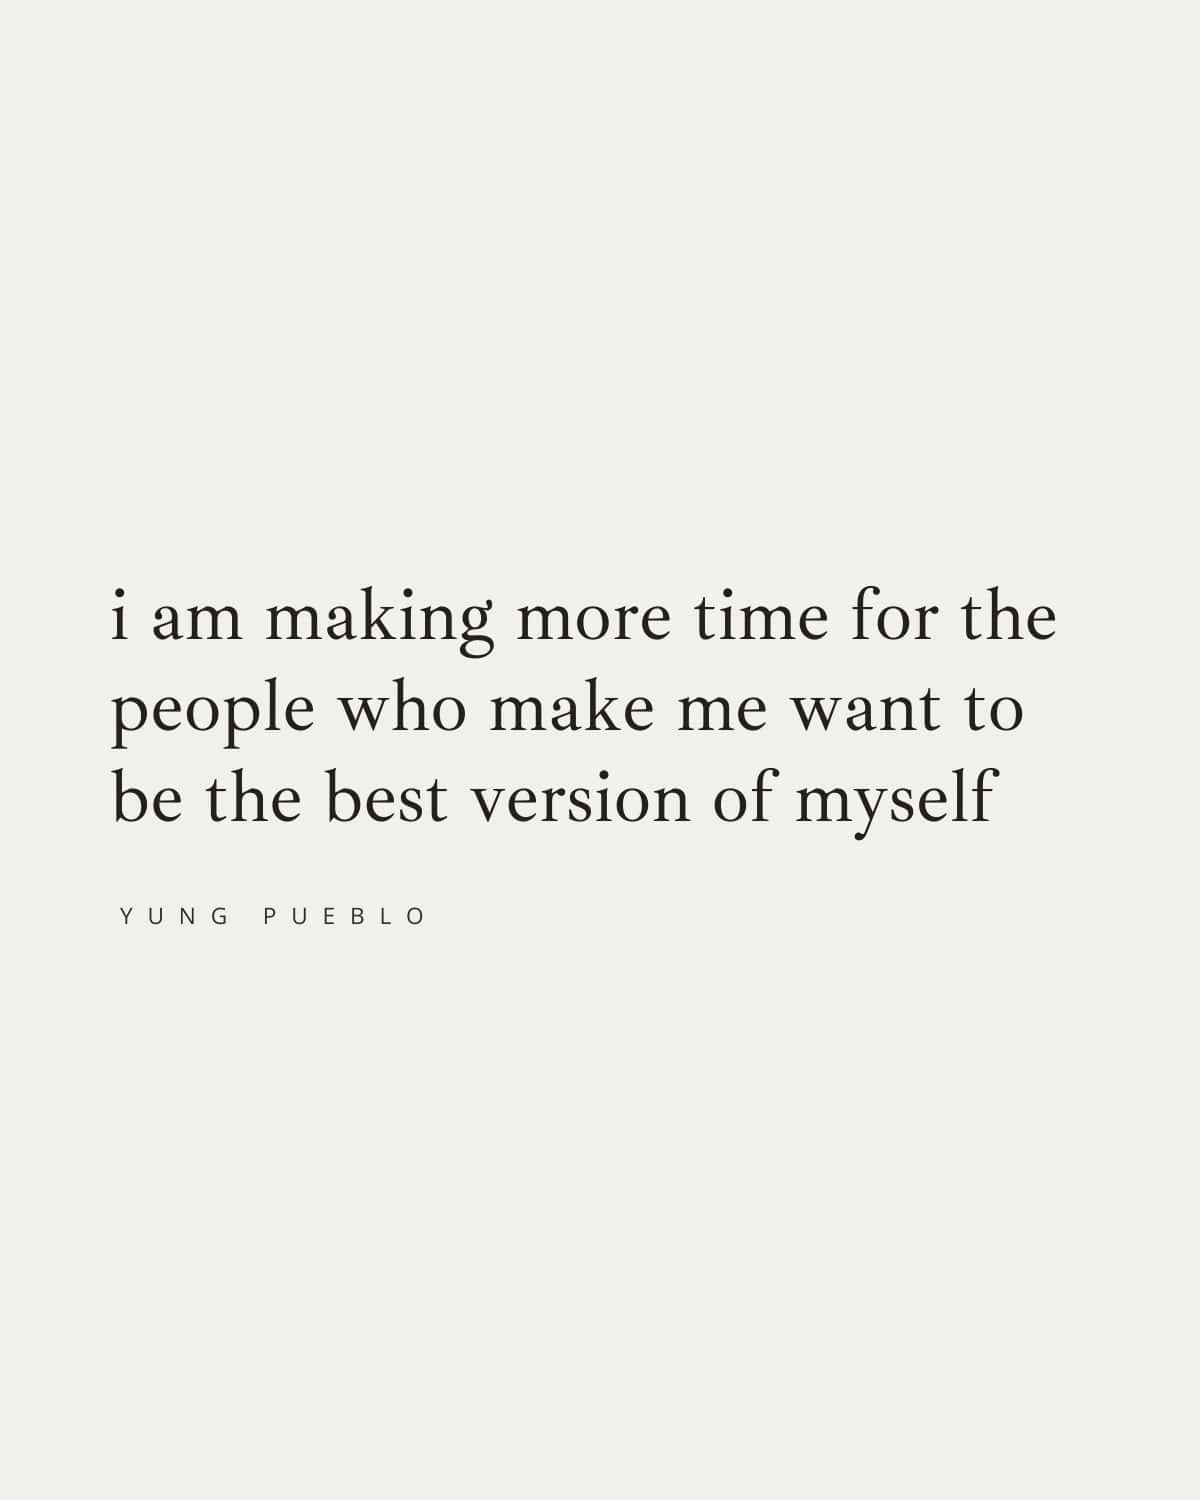 i am making more time for the 
people who make me want to 
be the best version of myself
—yung pueblo